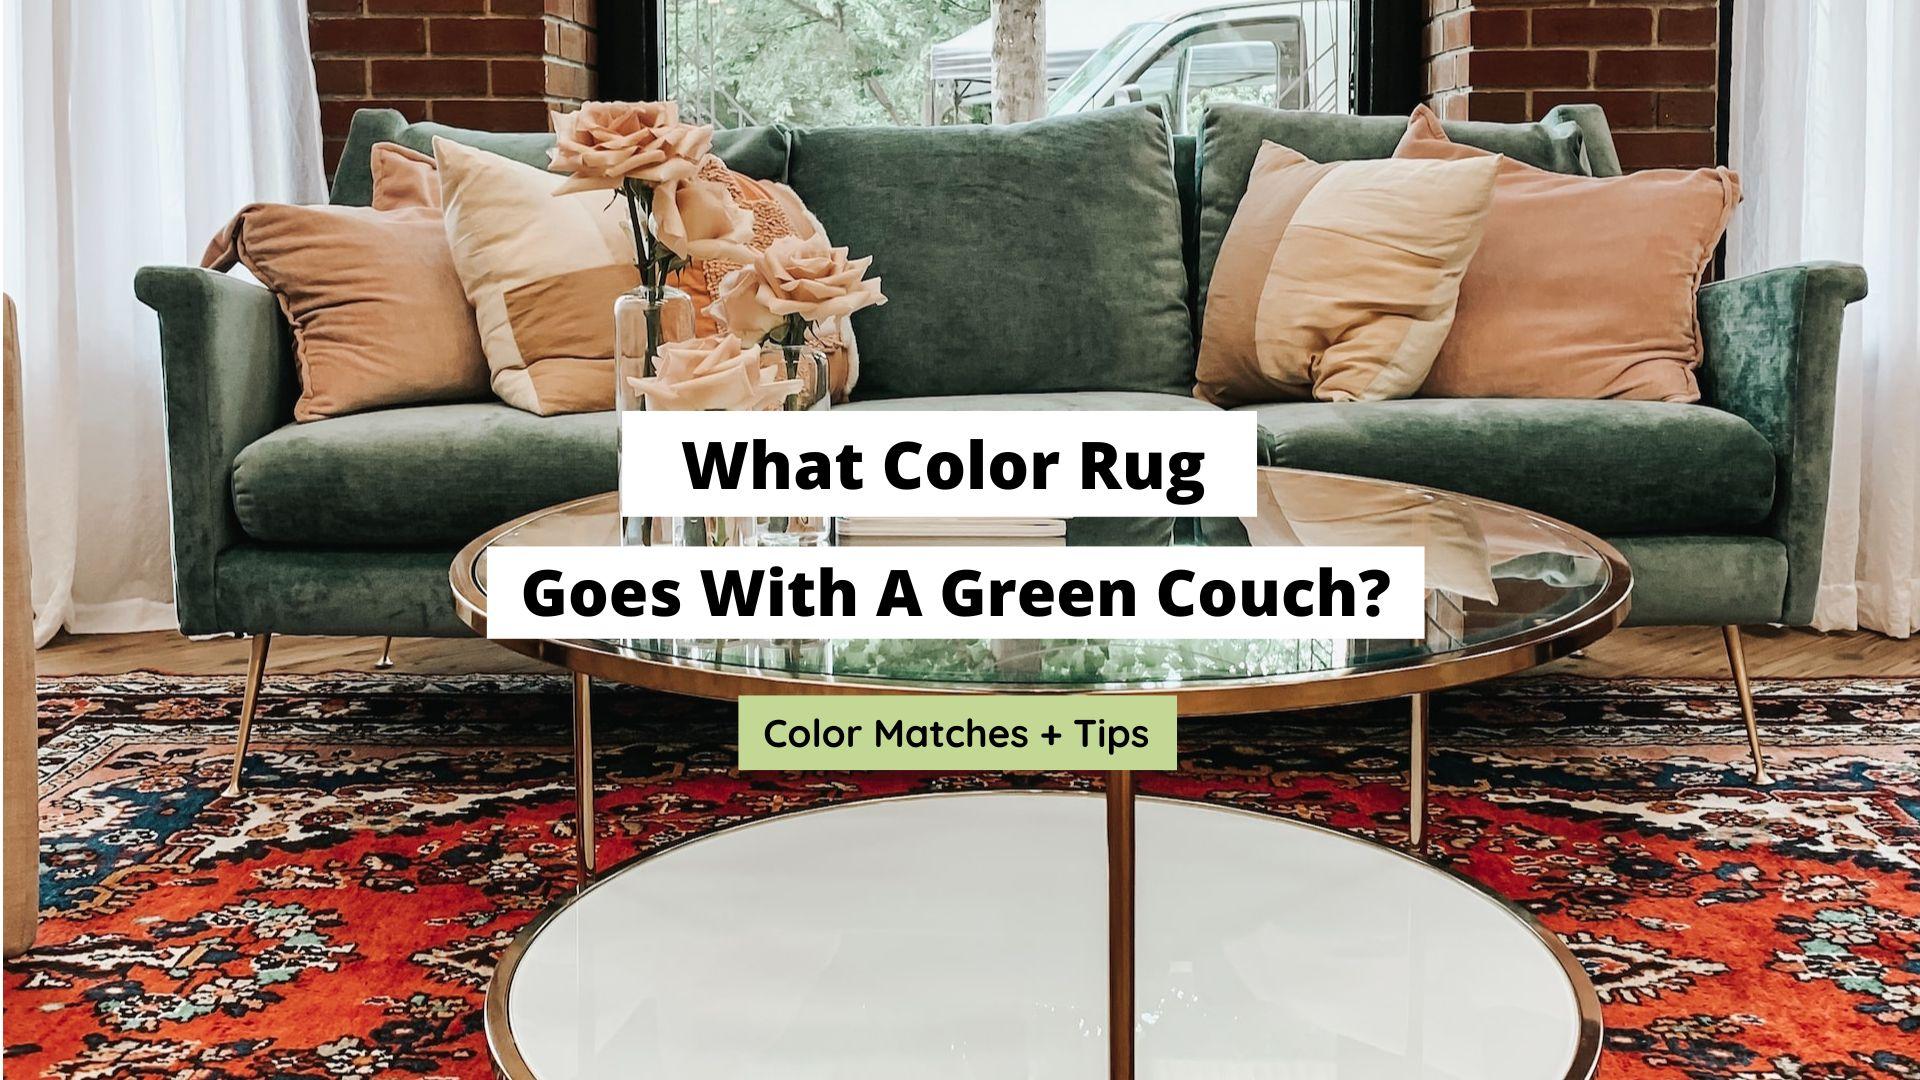 https://craftsonfire.com/wp-content/uploads/2023/02/what-color-rug-goes-with-a-green-couch.jpg